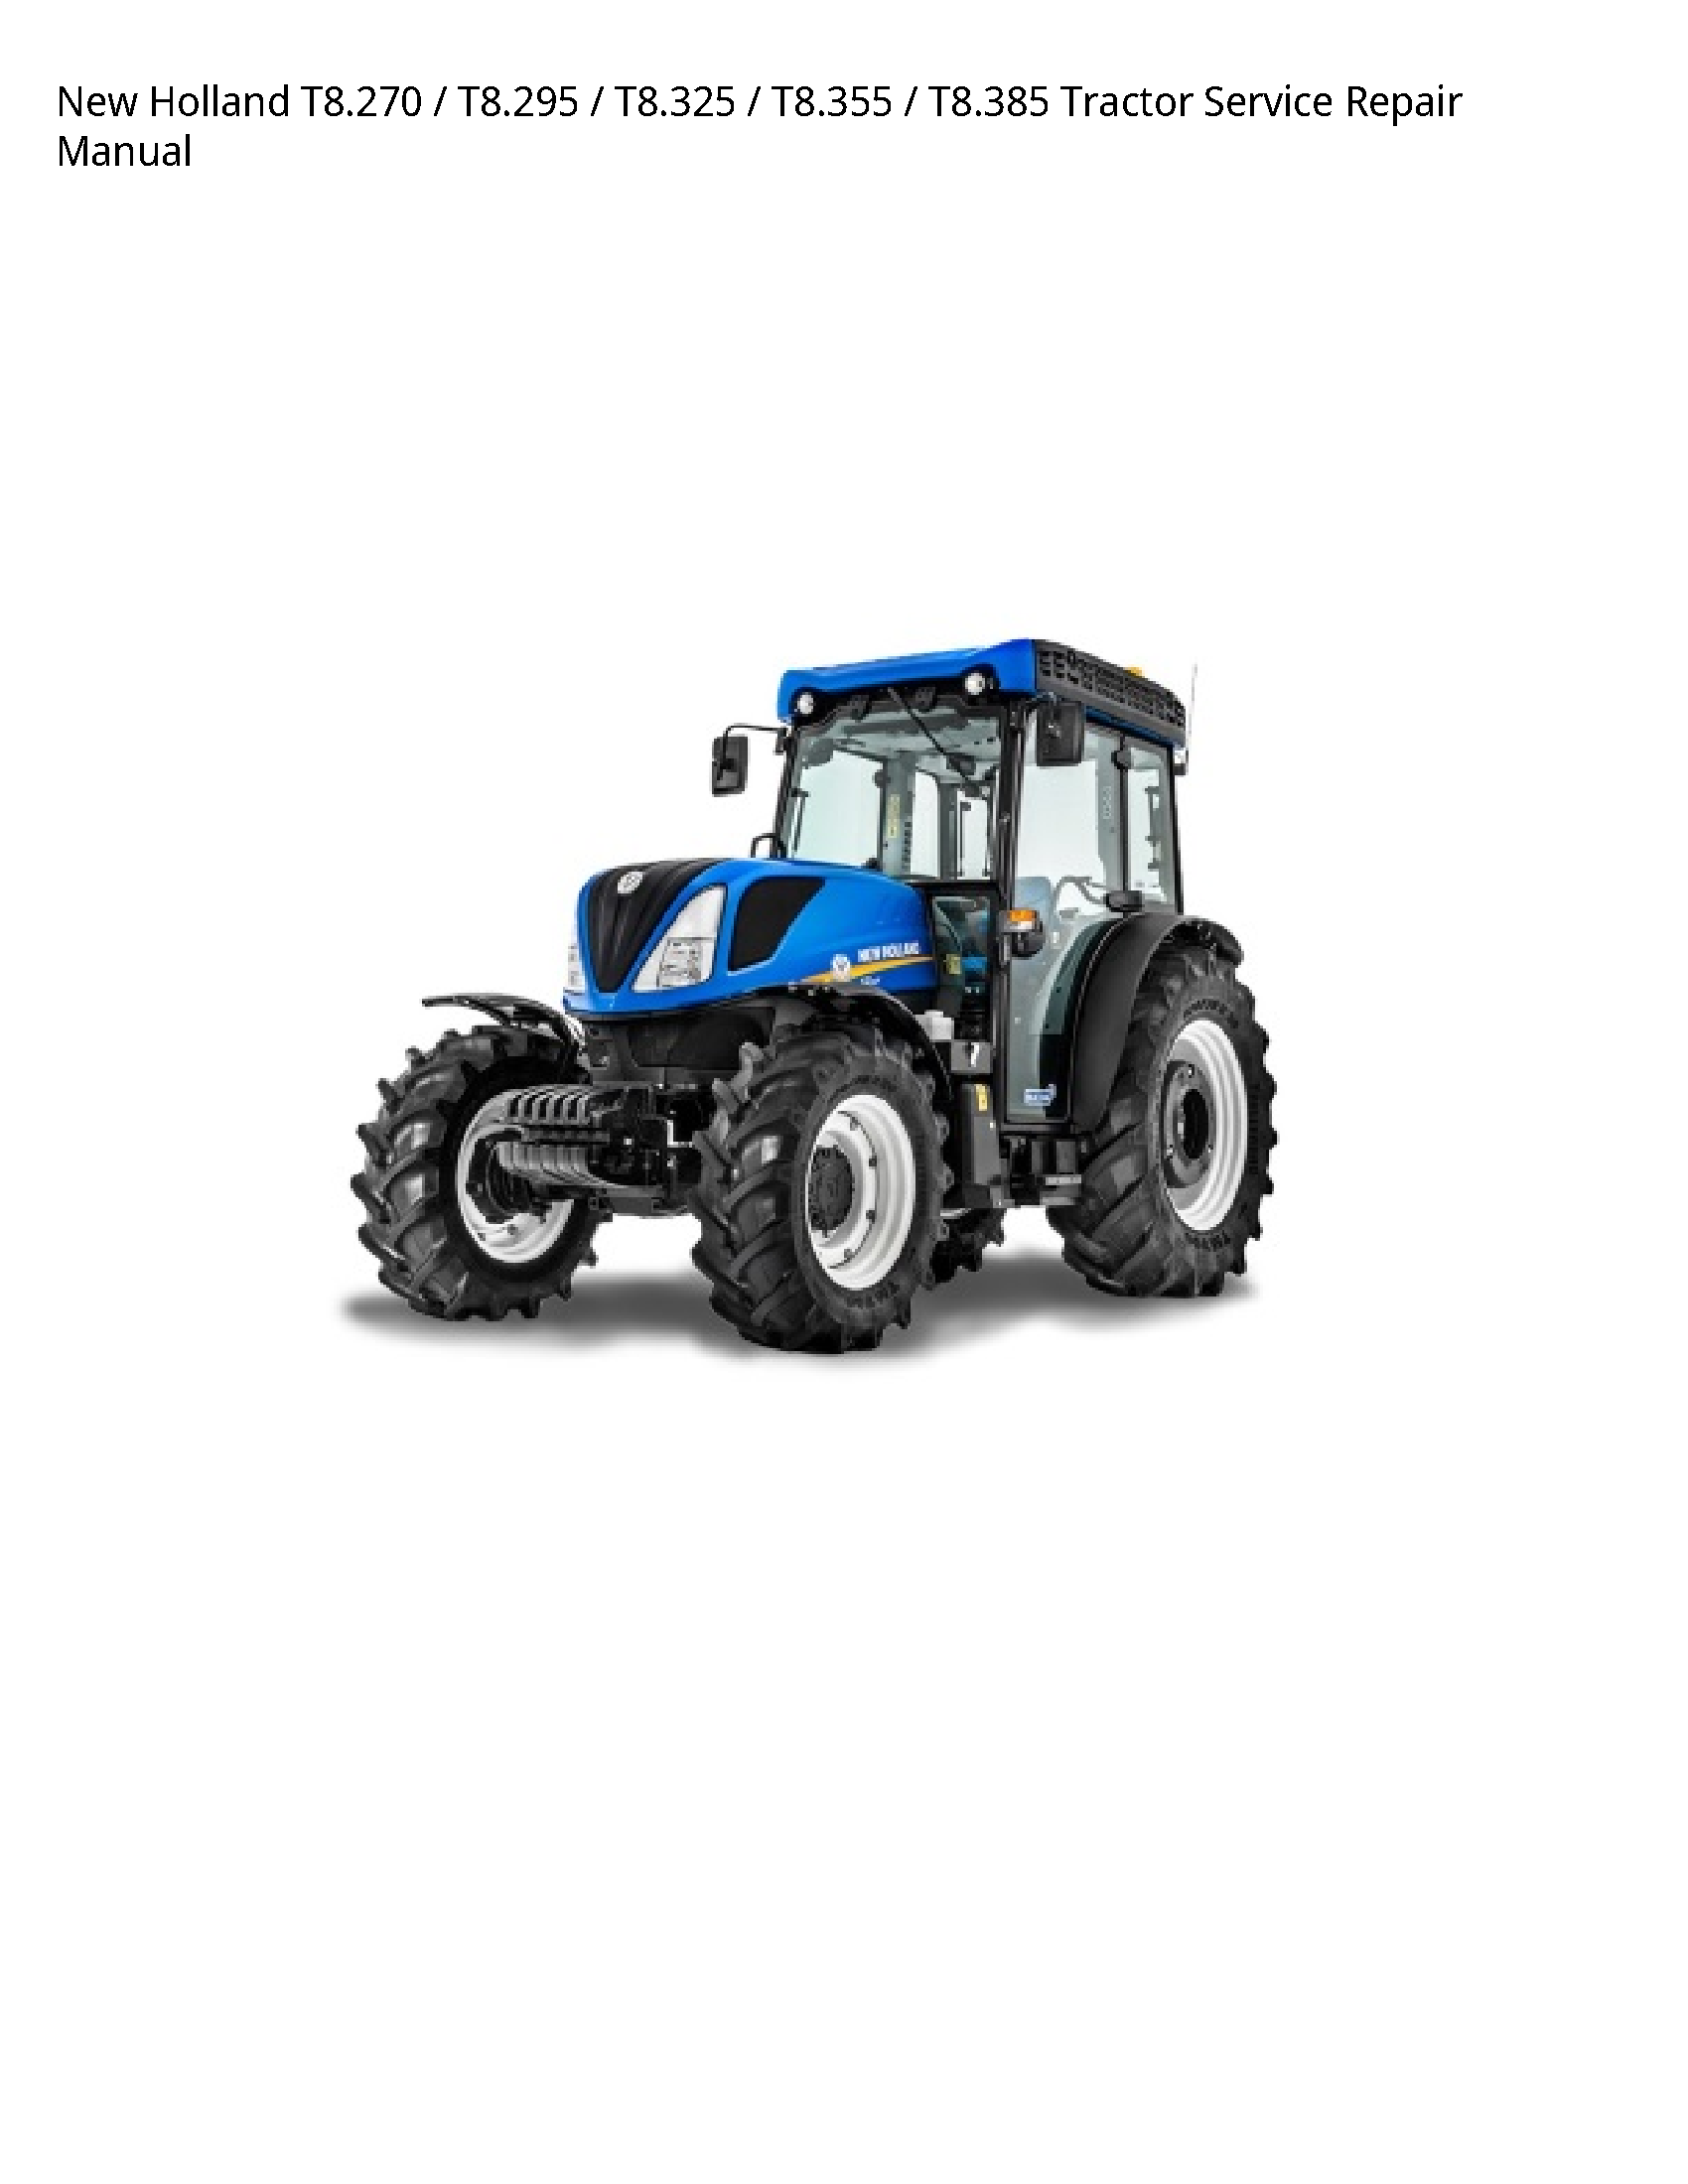 New Holland T8.270 Tractor manual